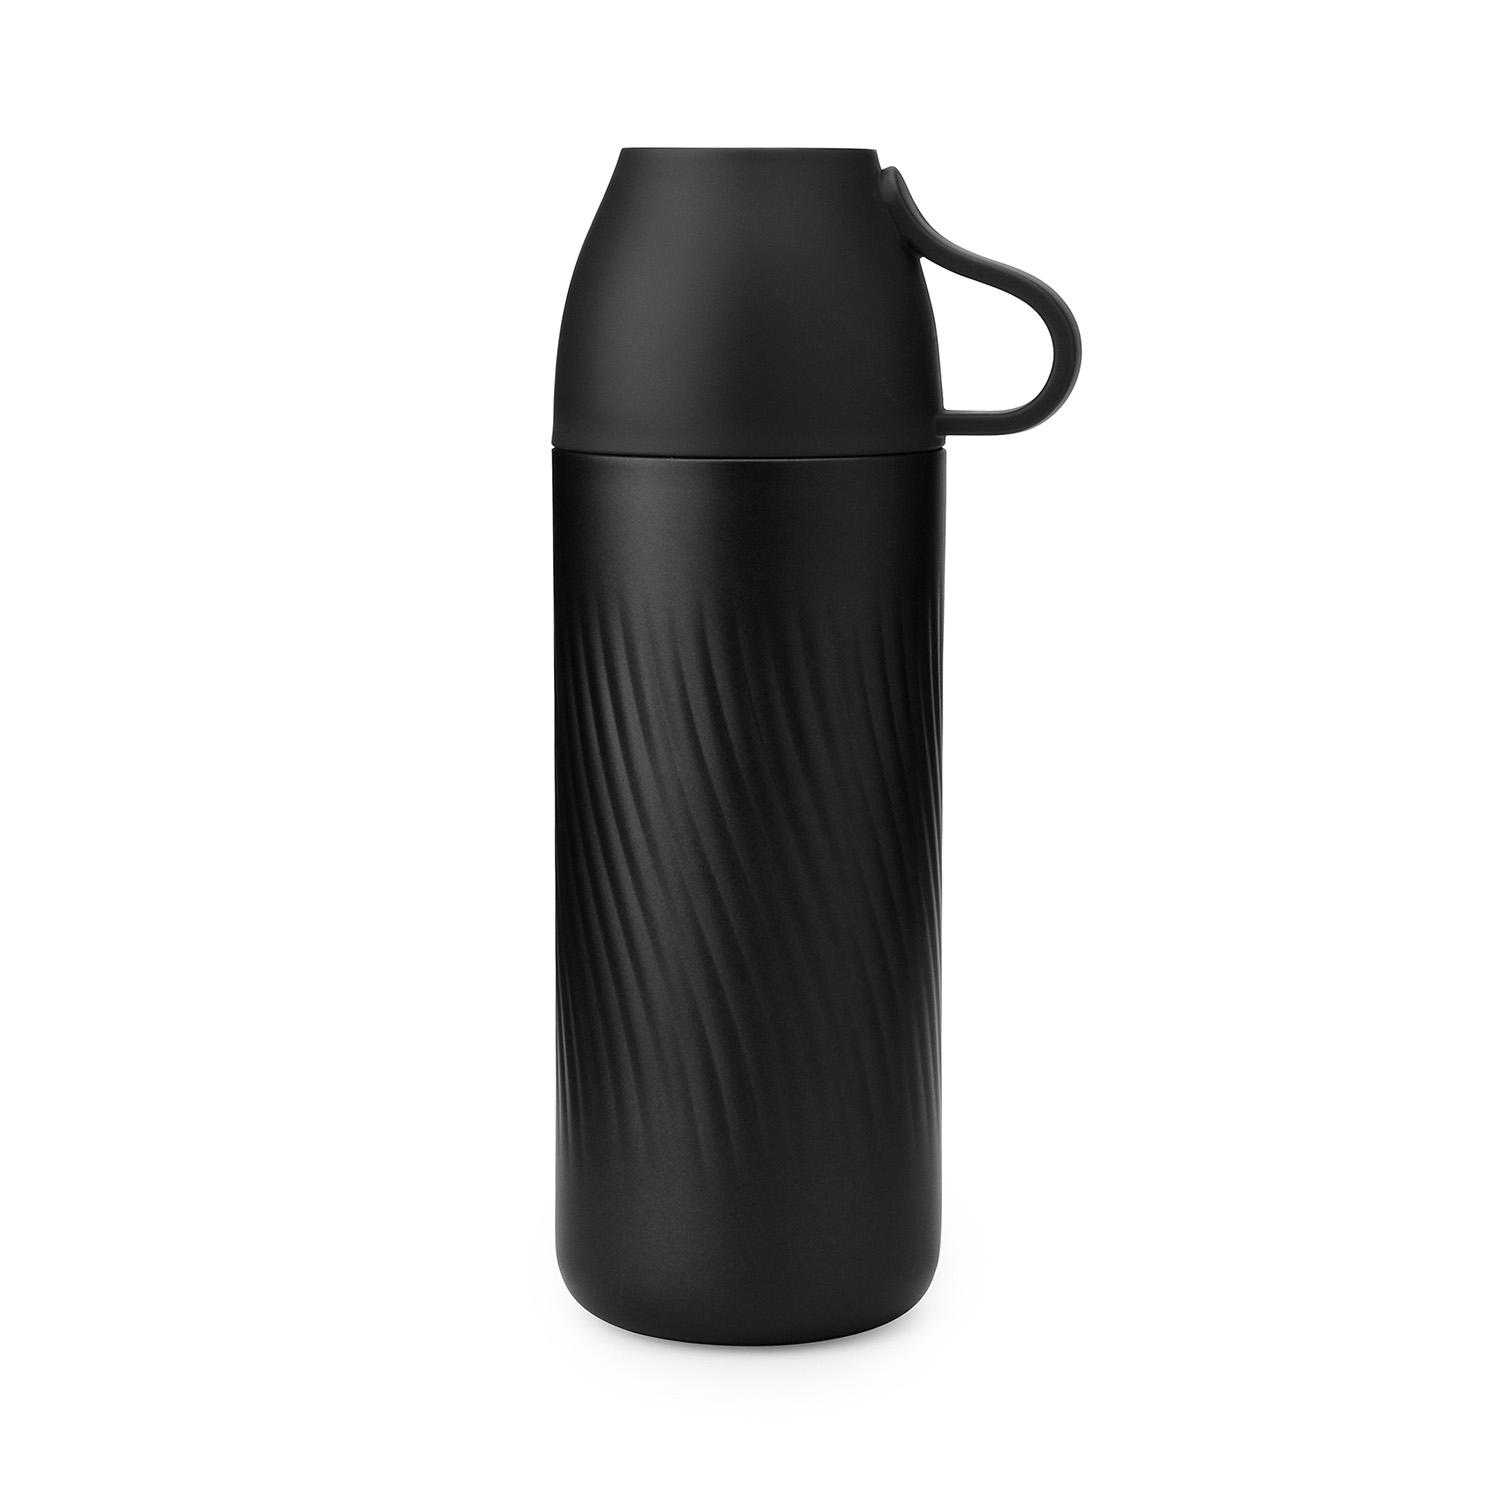 Insulated Compact Stainless Steel Beverage Bottle with Storage Cup Cap